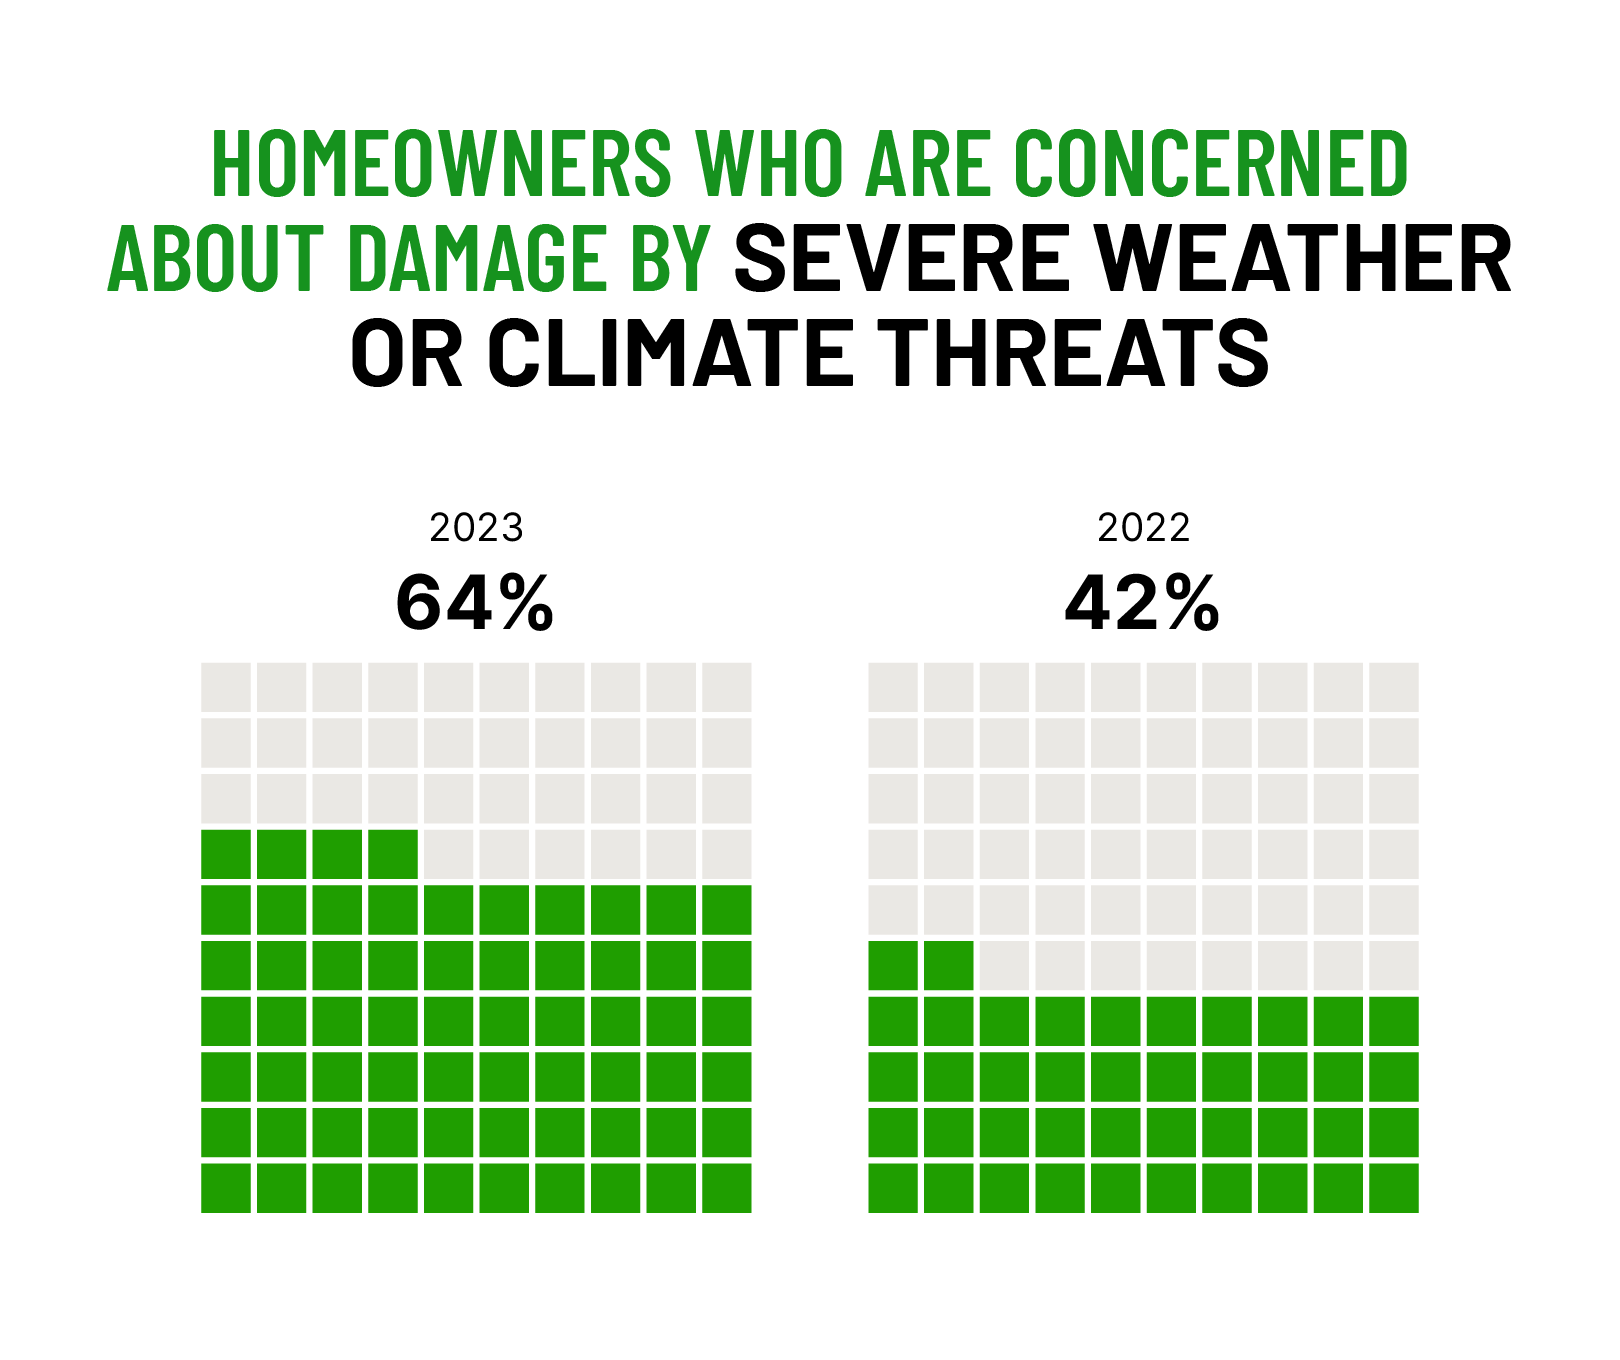 comparison of homeowners who are concerned about damage by severe weather or climate threats from the 2022 report and the 2023 report